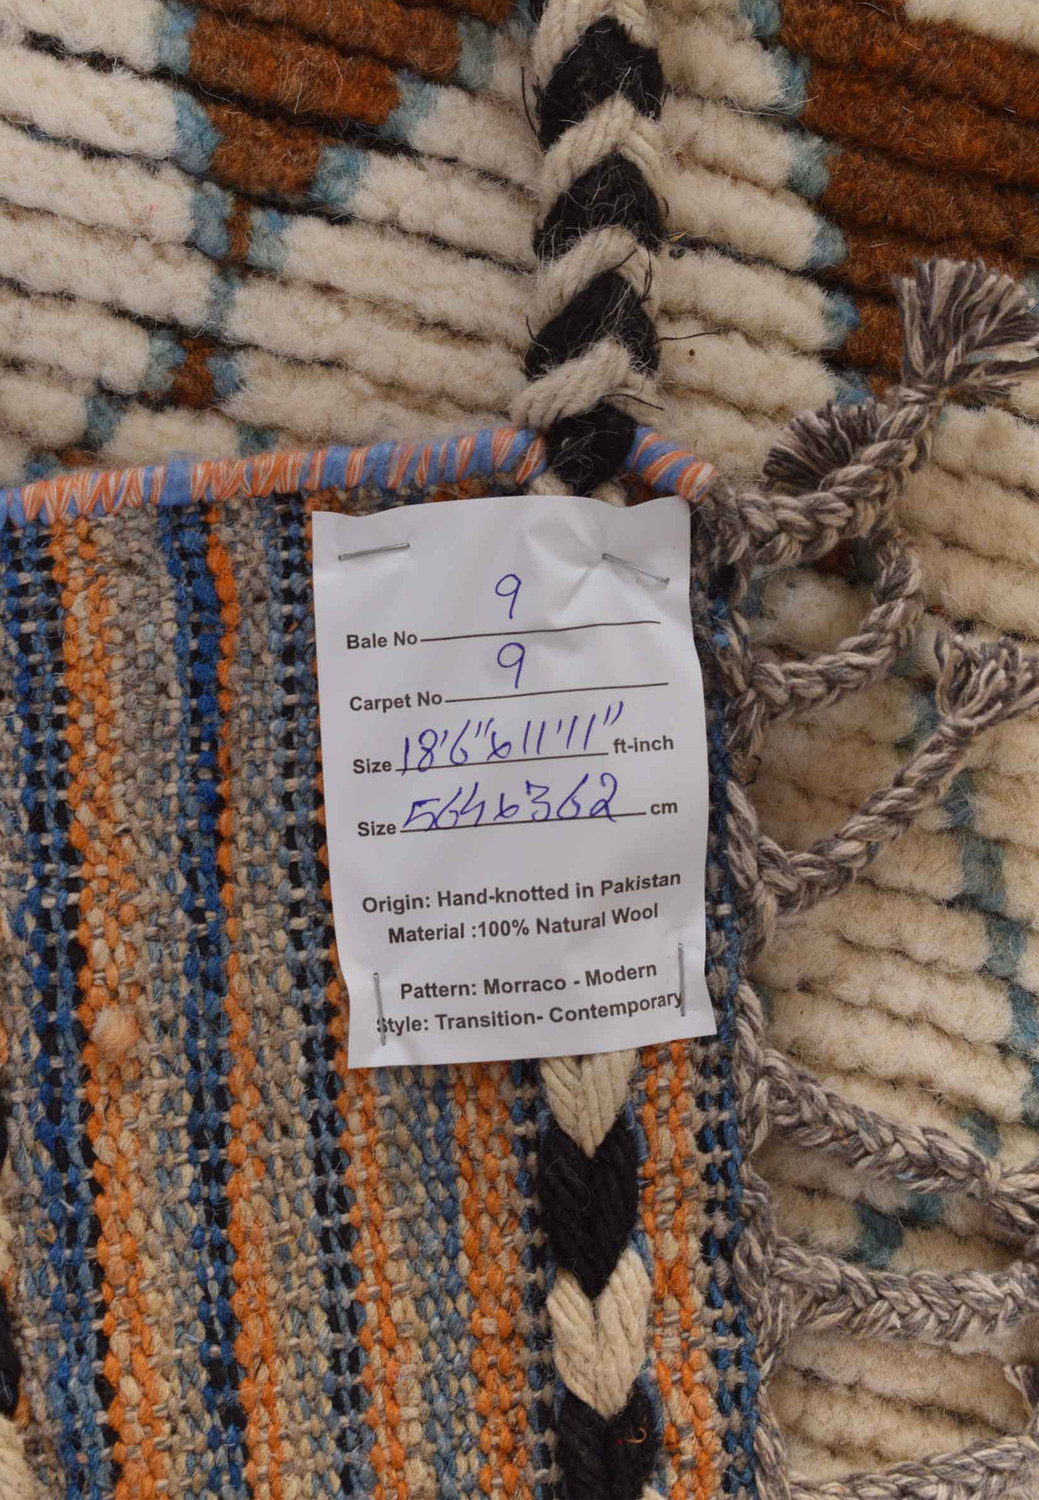 A label on a modern Moroccan rug providing details on size, origin, and material, confirming its authenticity